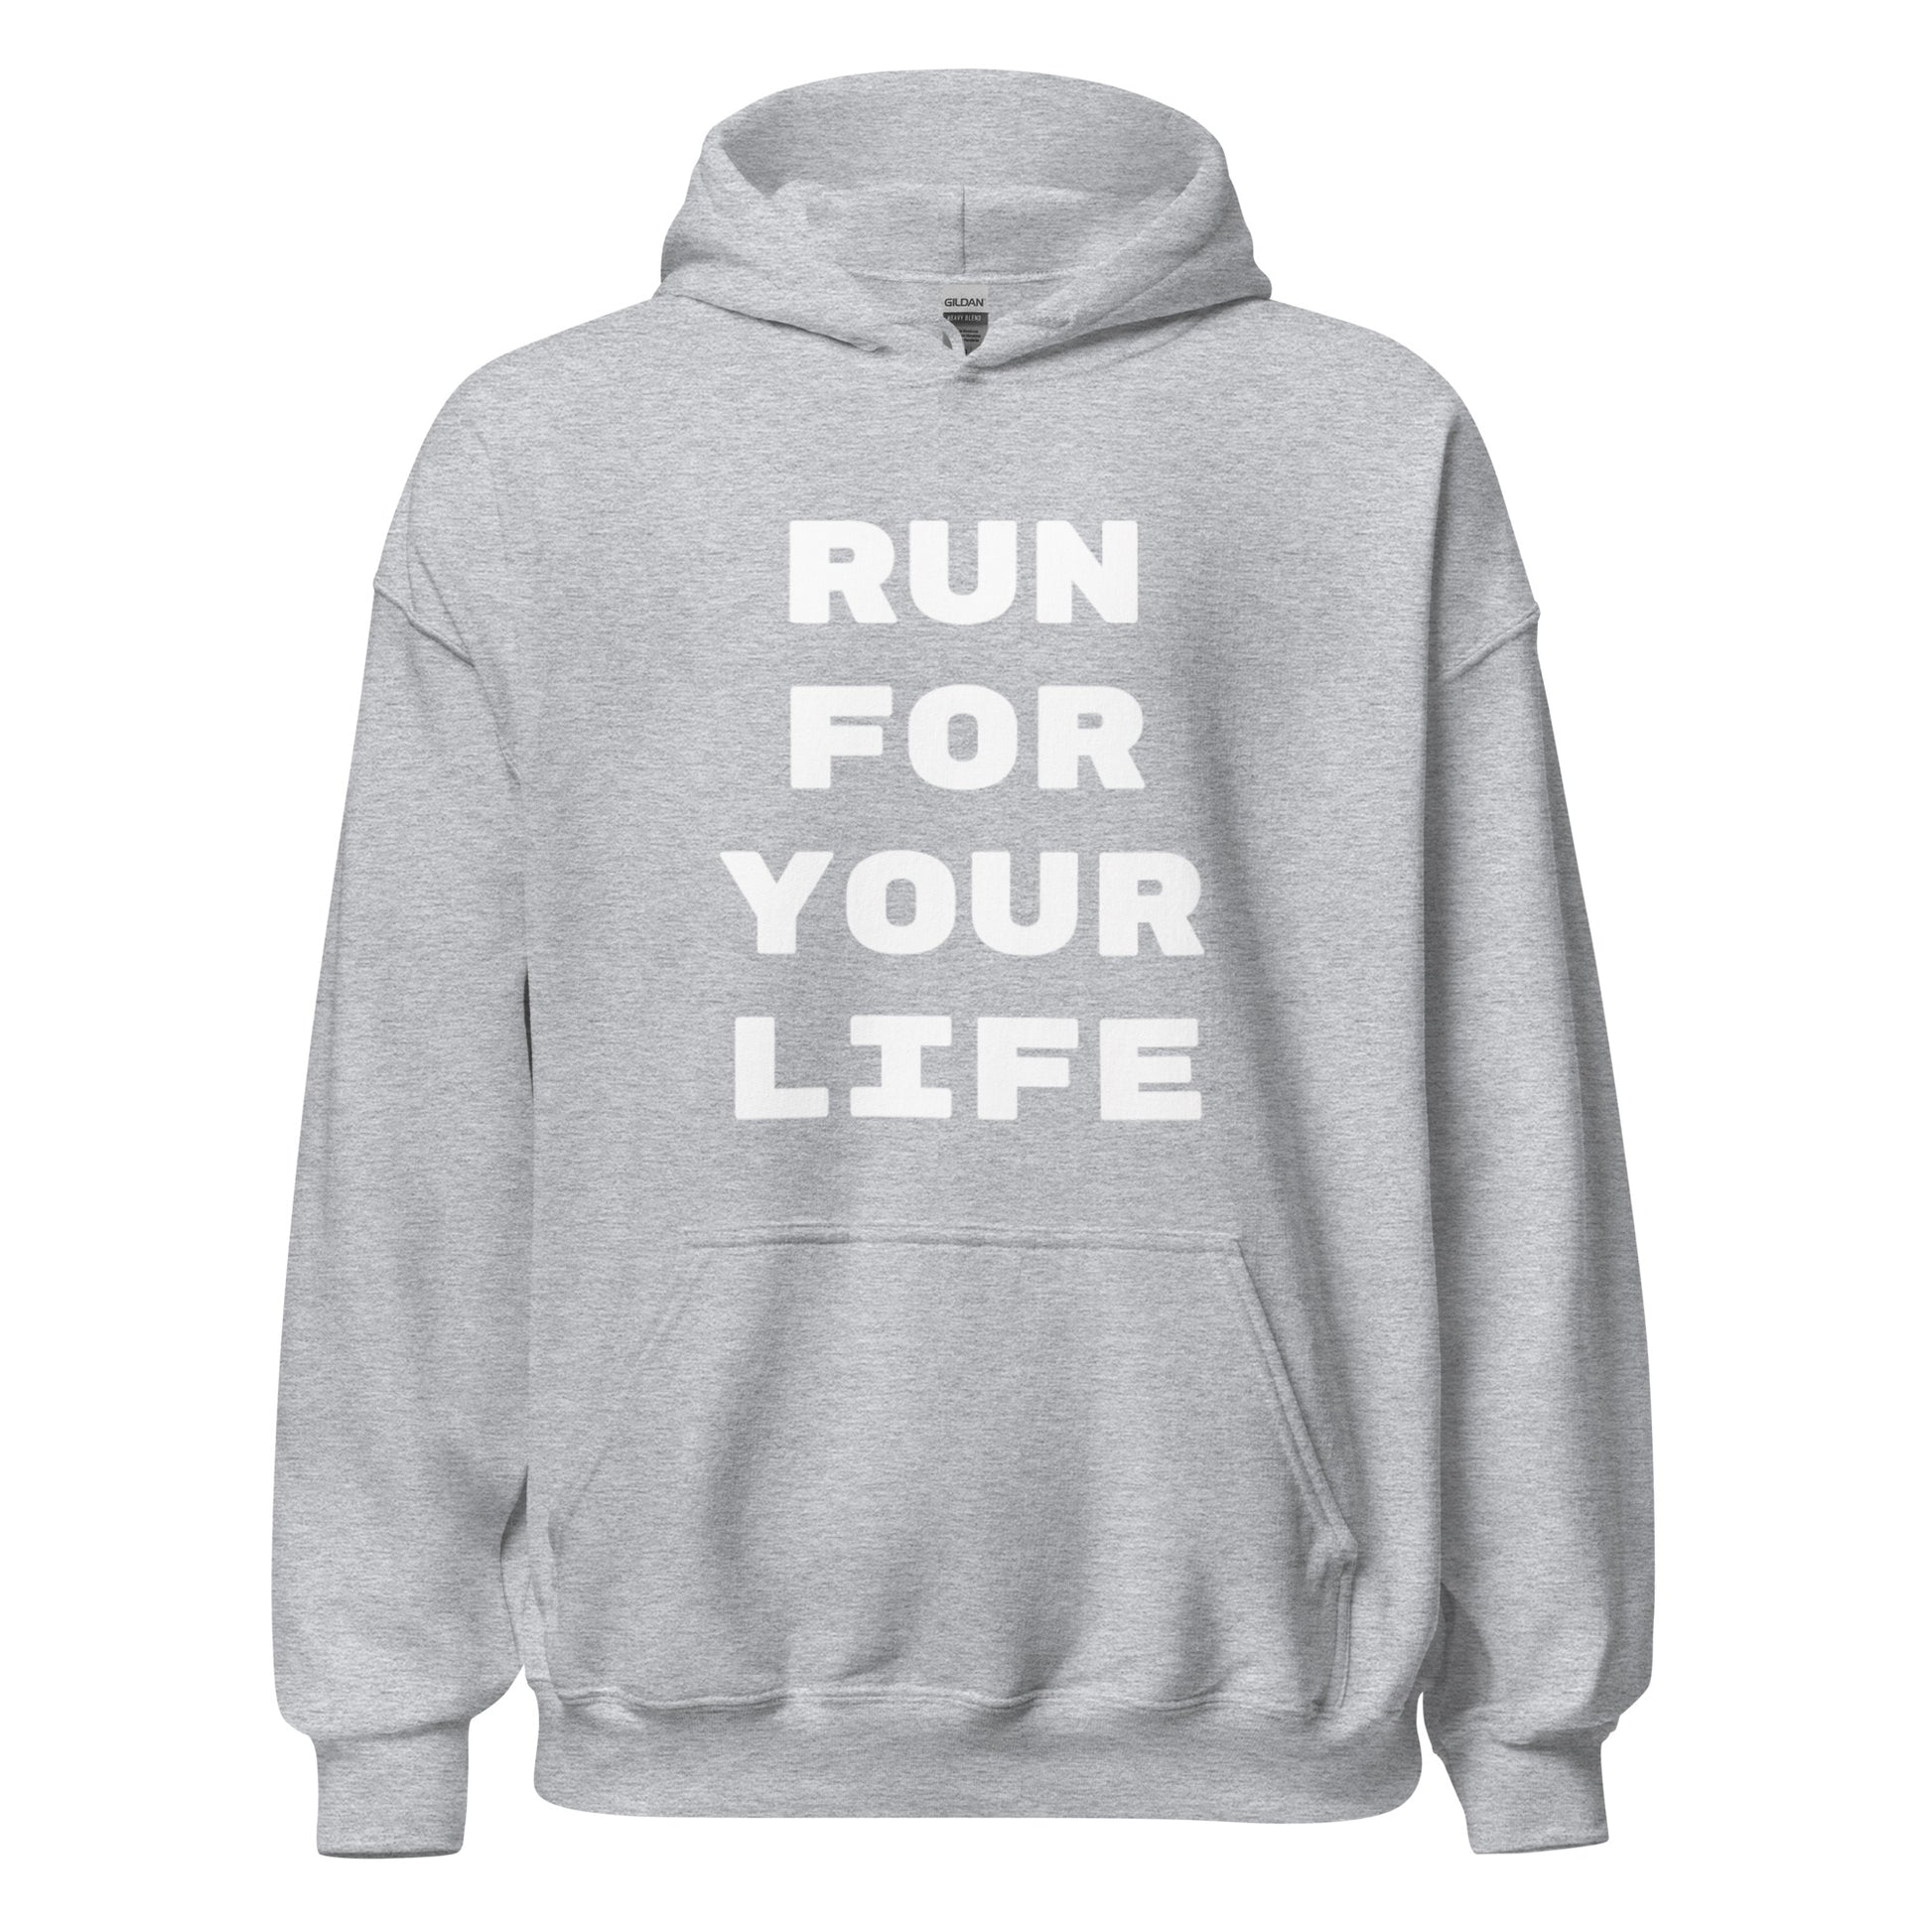 RUN FOR YOUR LIFE (WHITE WRITING)* - URBAN T&F